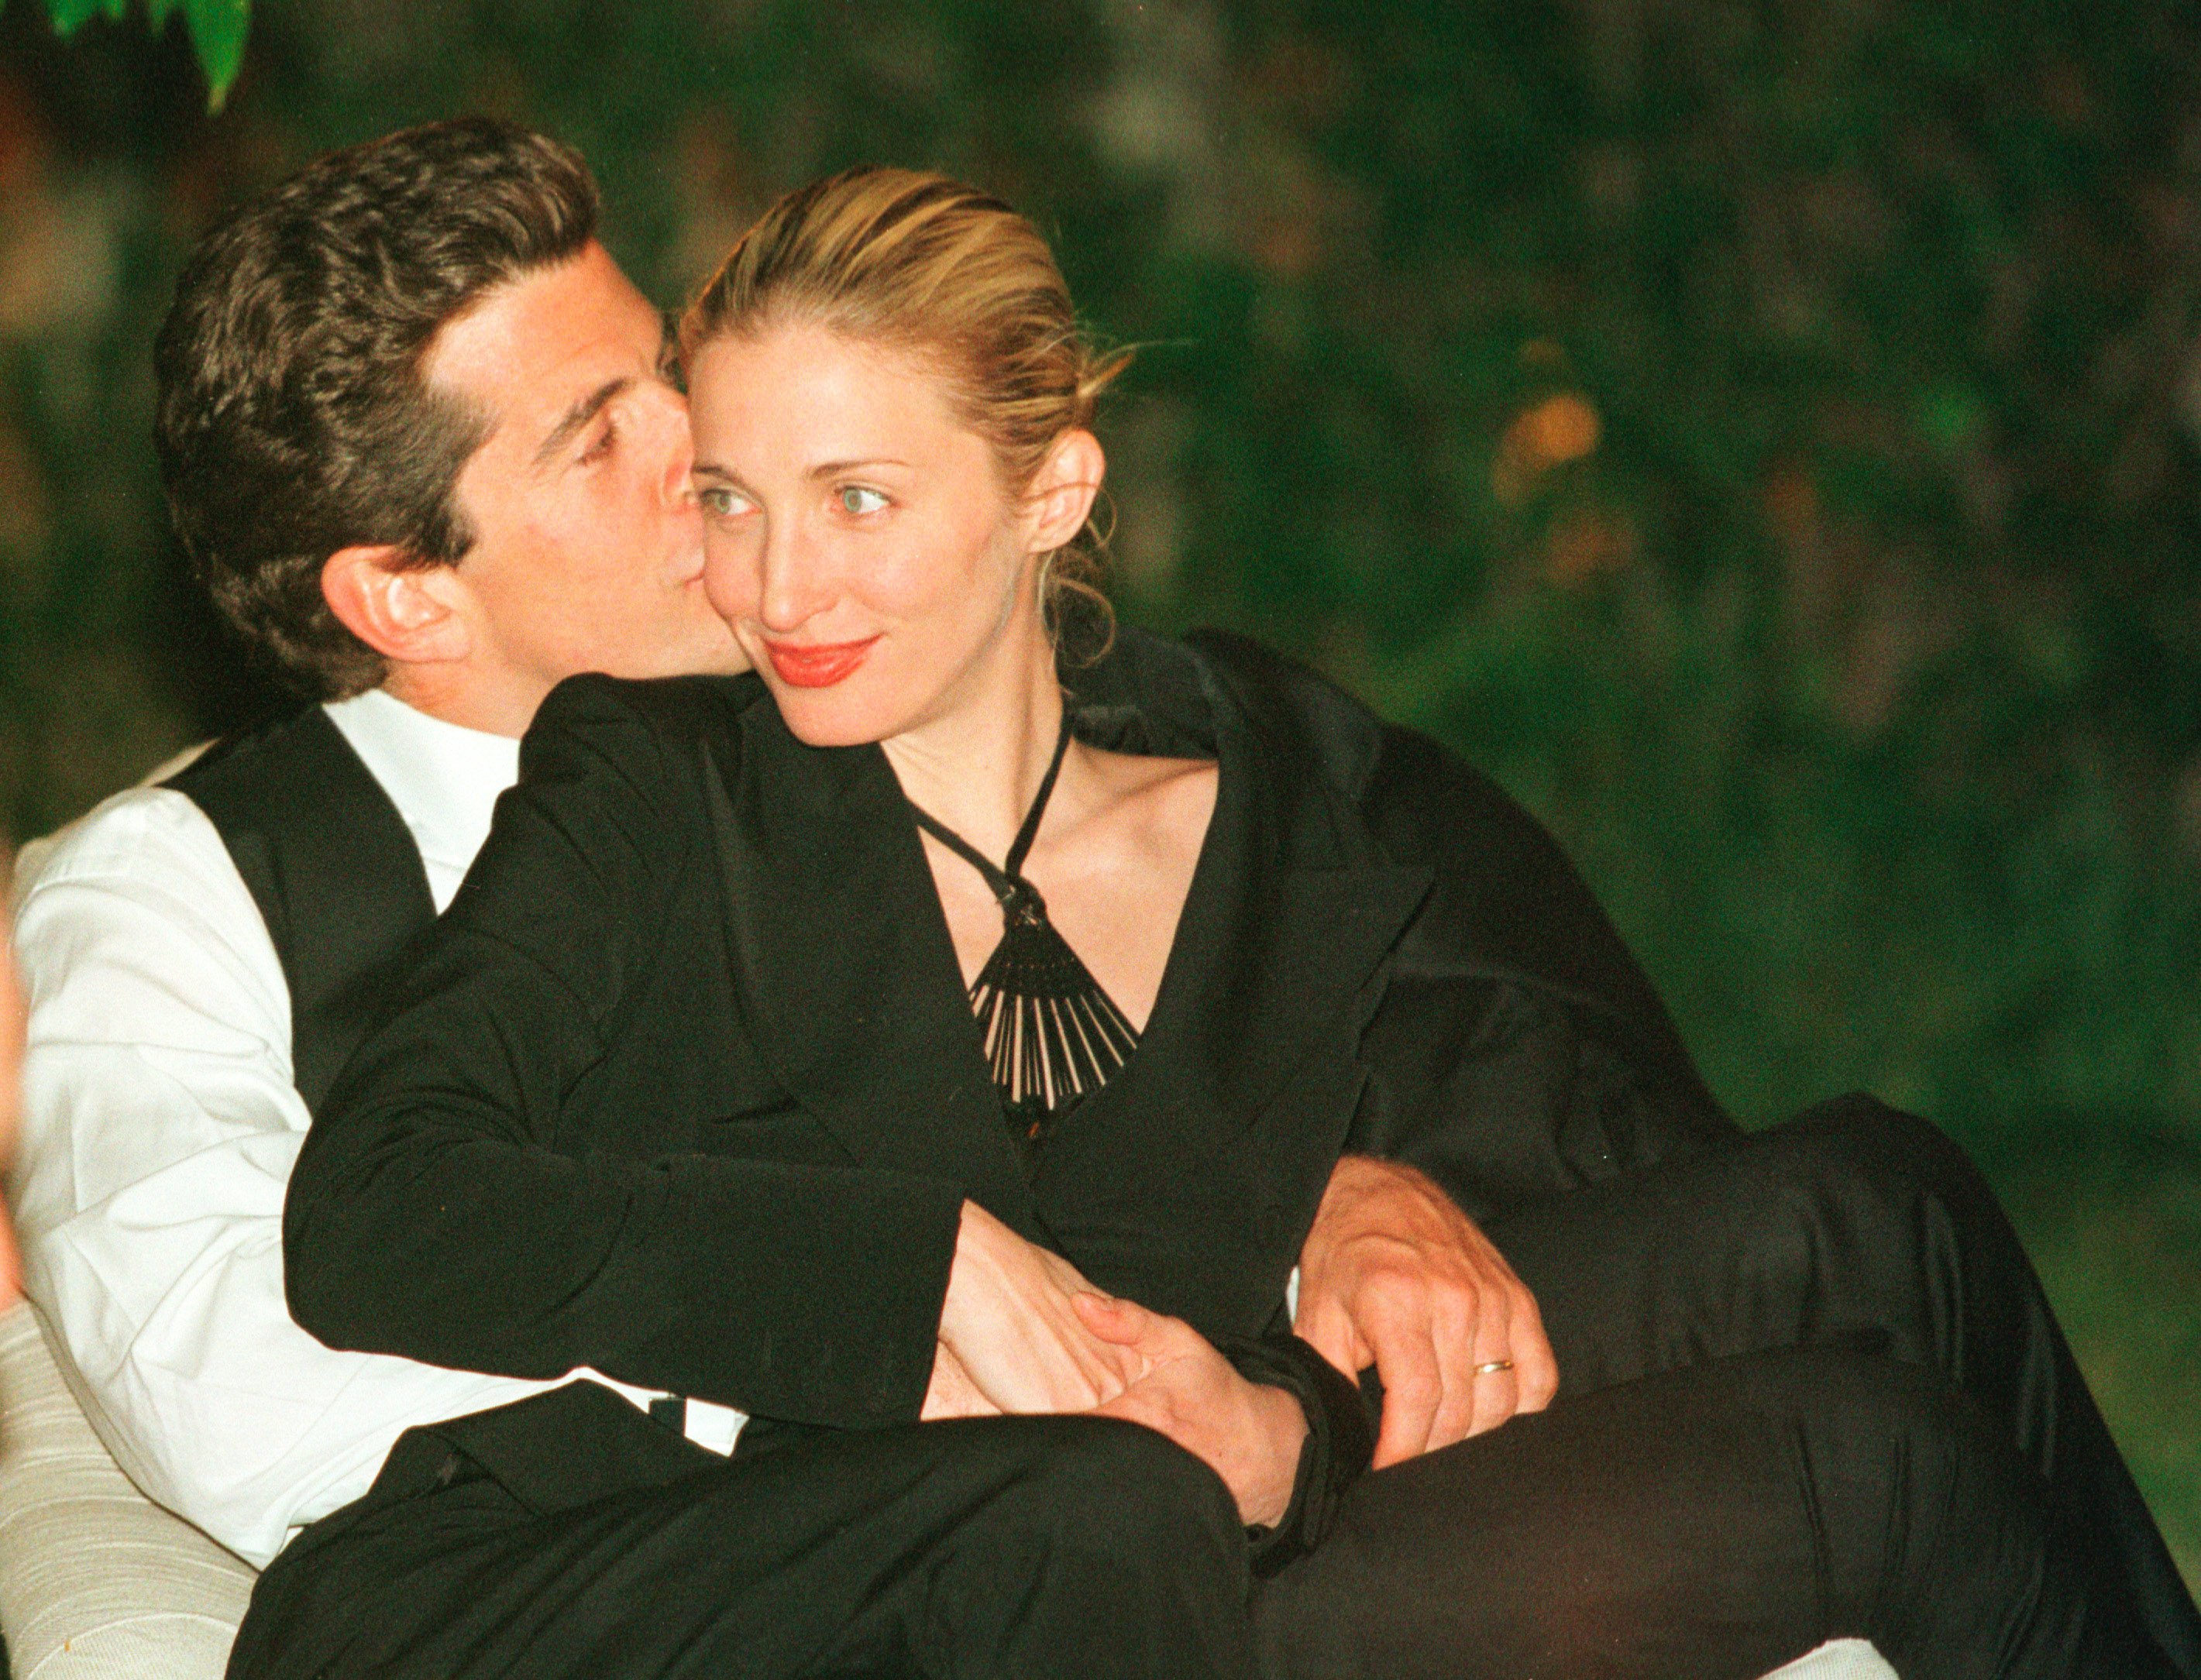 Carolyn Bessette-Kennedy with husband John F. Kennedy Jr, pictured less than three months before their deaths, during the annual White House Correspondents dinner May 1, 1999 in Washington, D.C. Though the couple were killed almost 25 years ago, she remains an enduring influence on designers today. Photo:Liaison